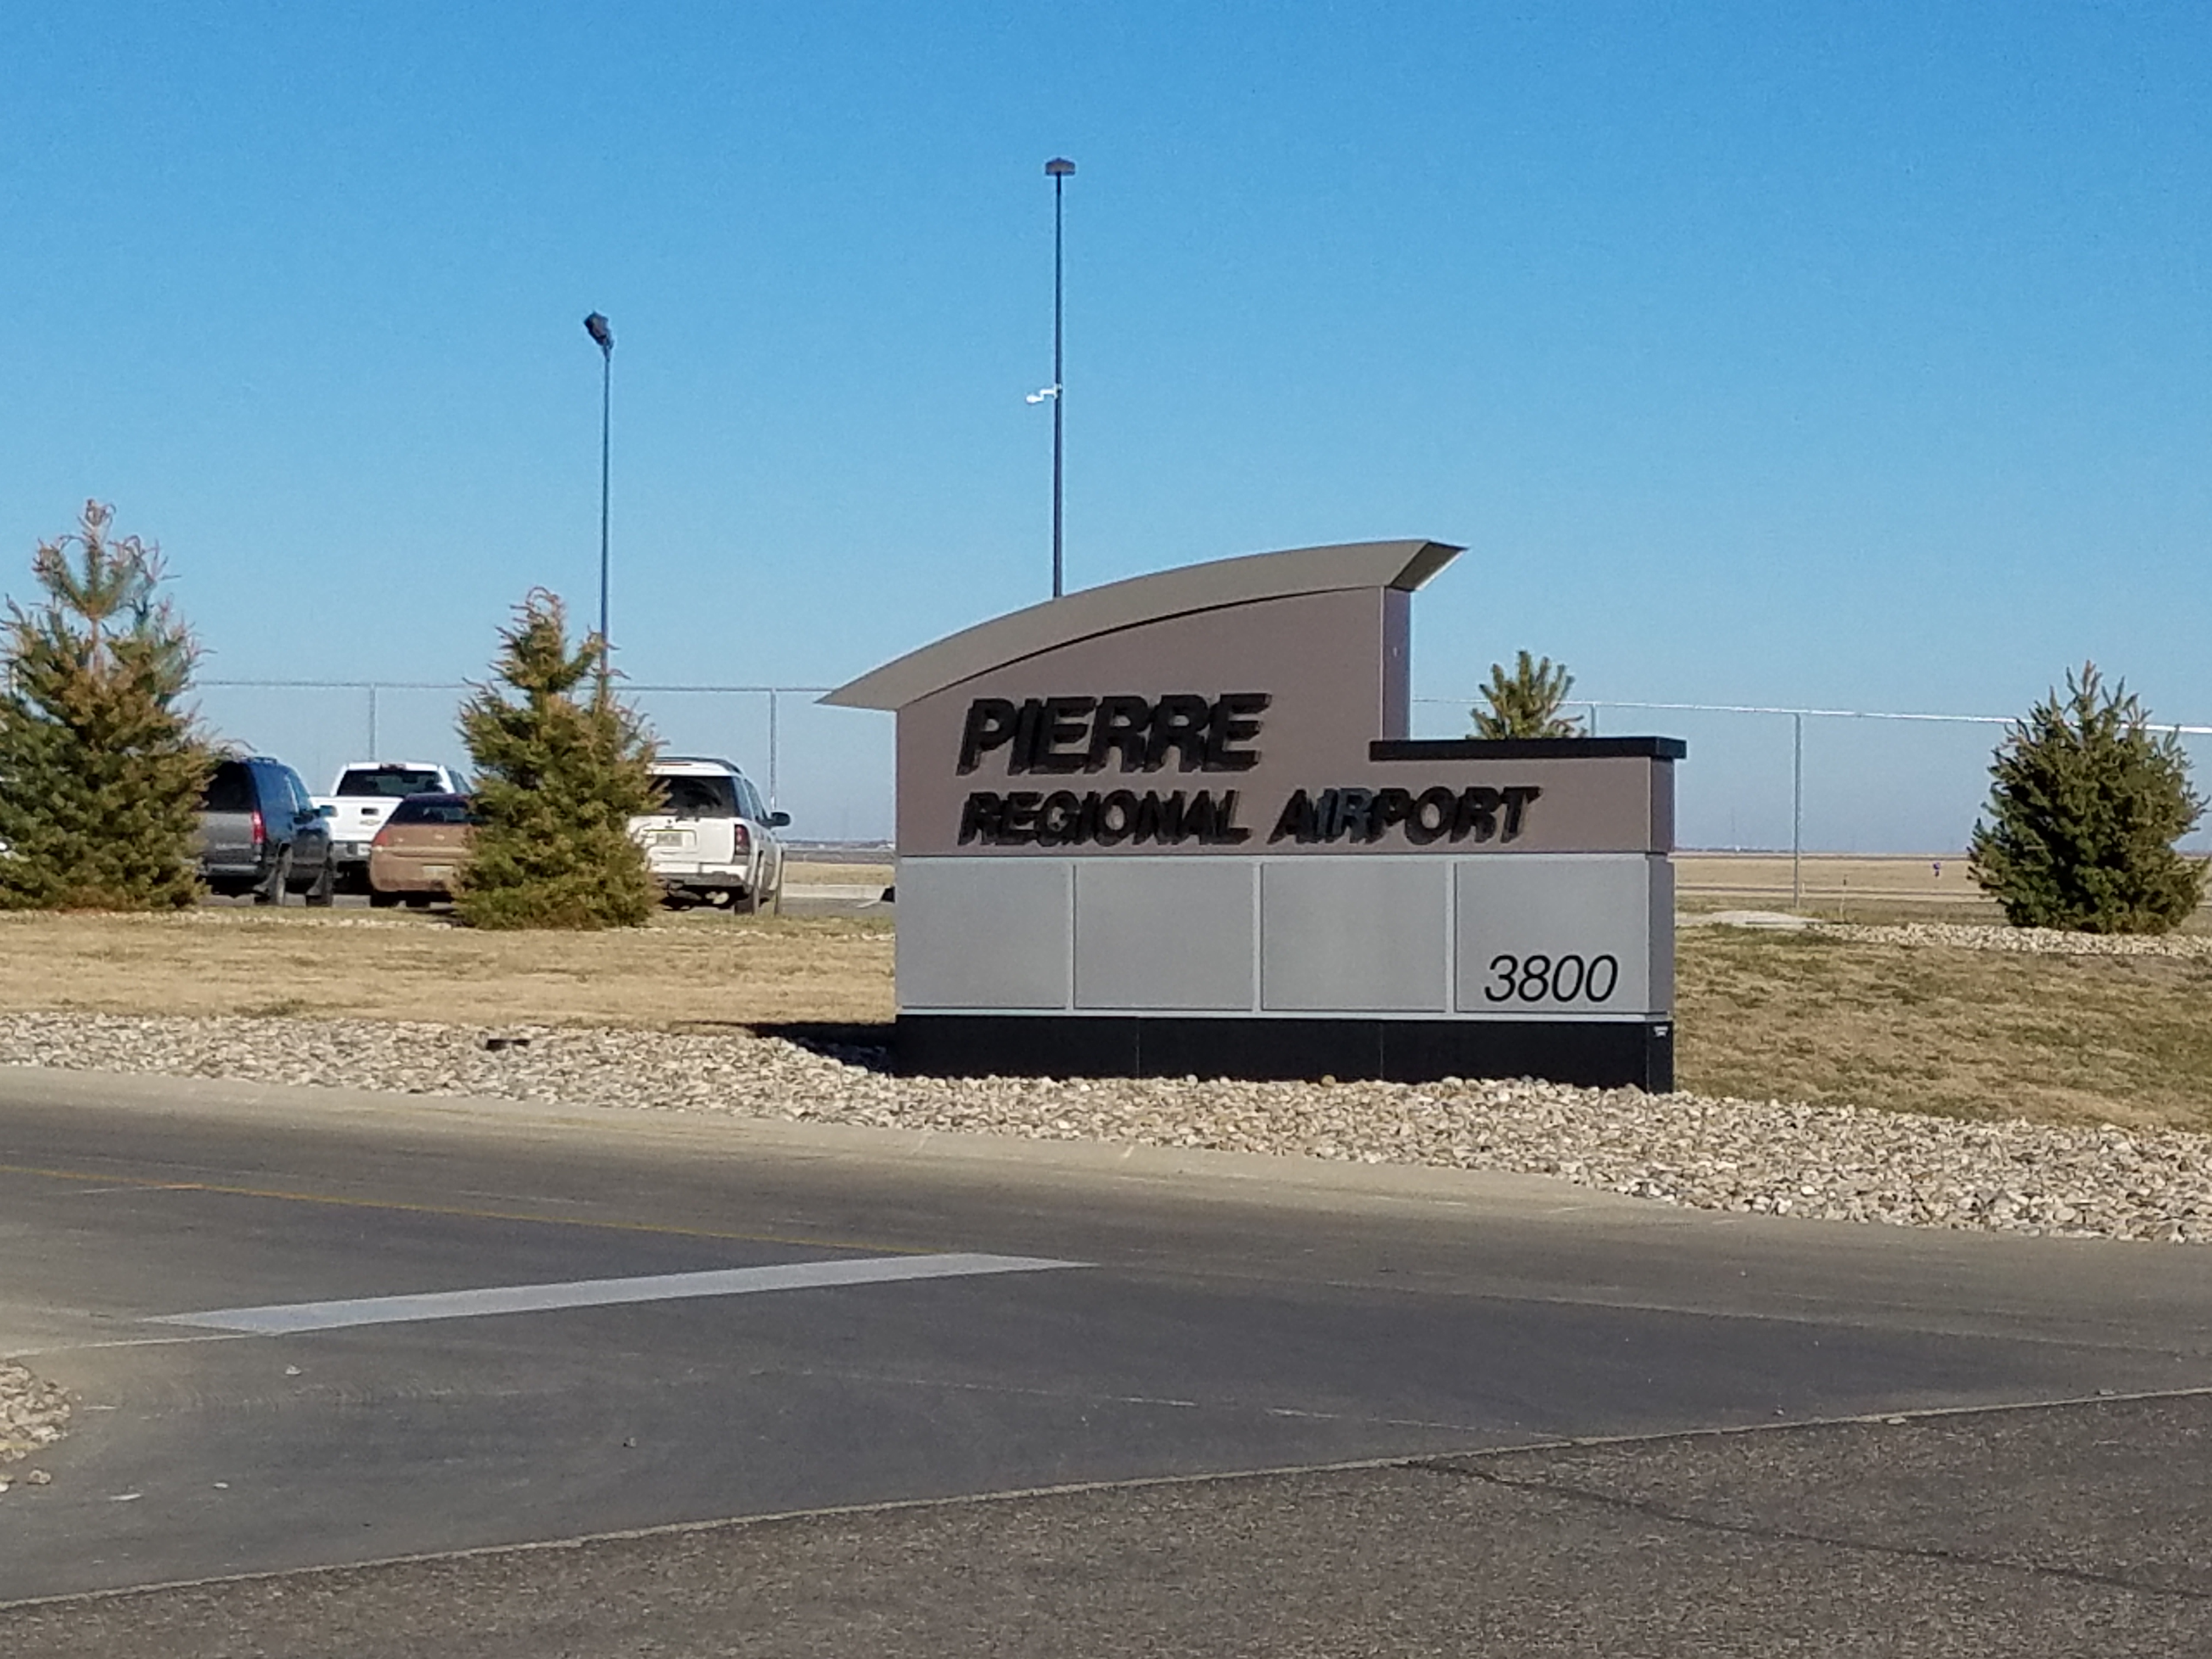 Pierre City Commission Approves Request To Seek Marketing Proposals For Pierre Regional Airport